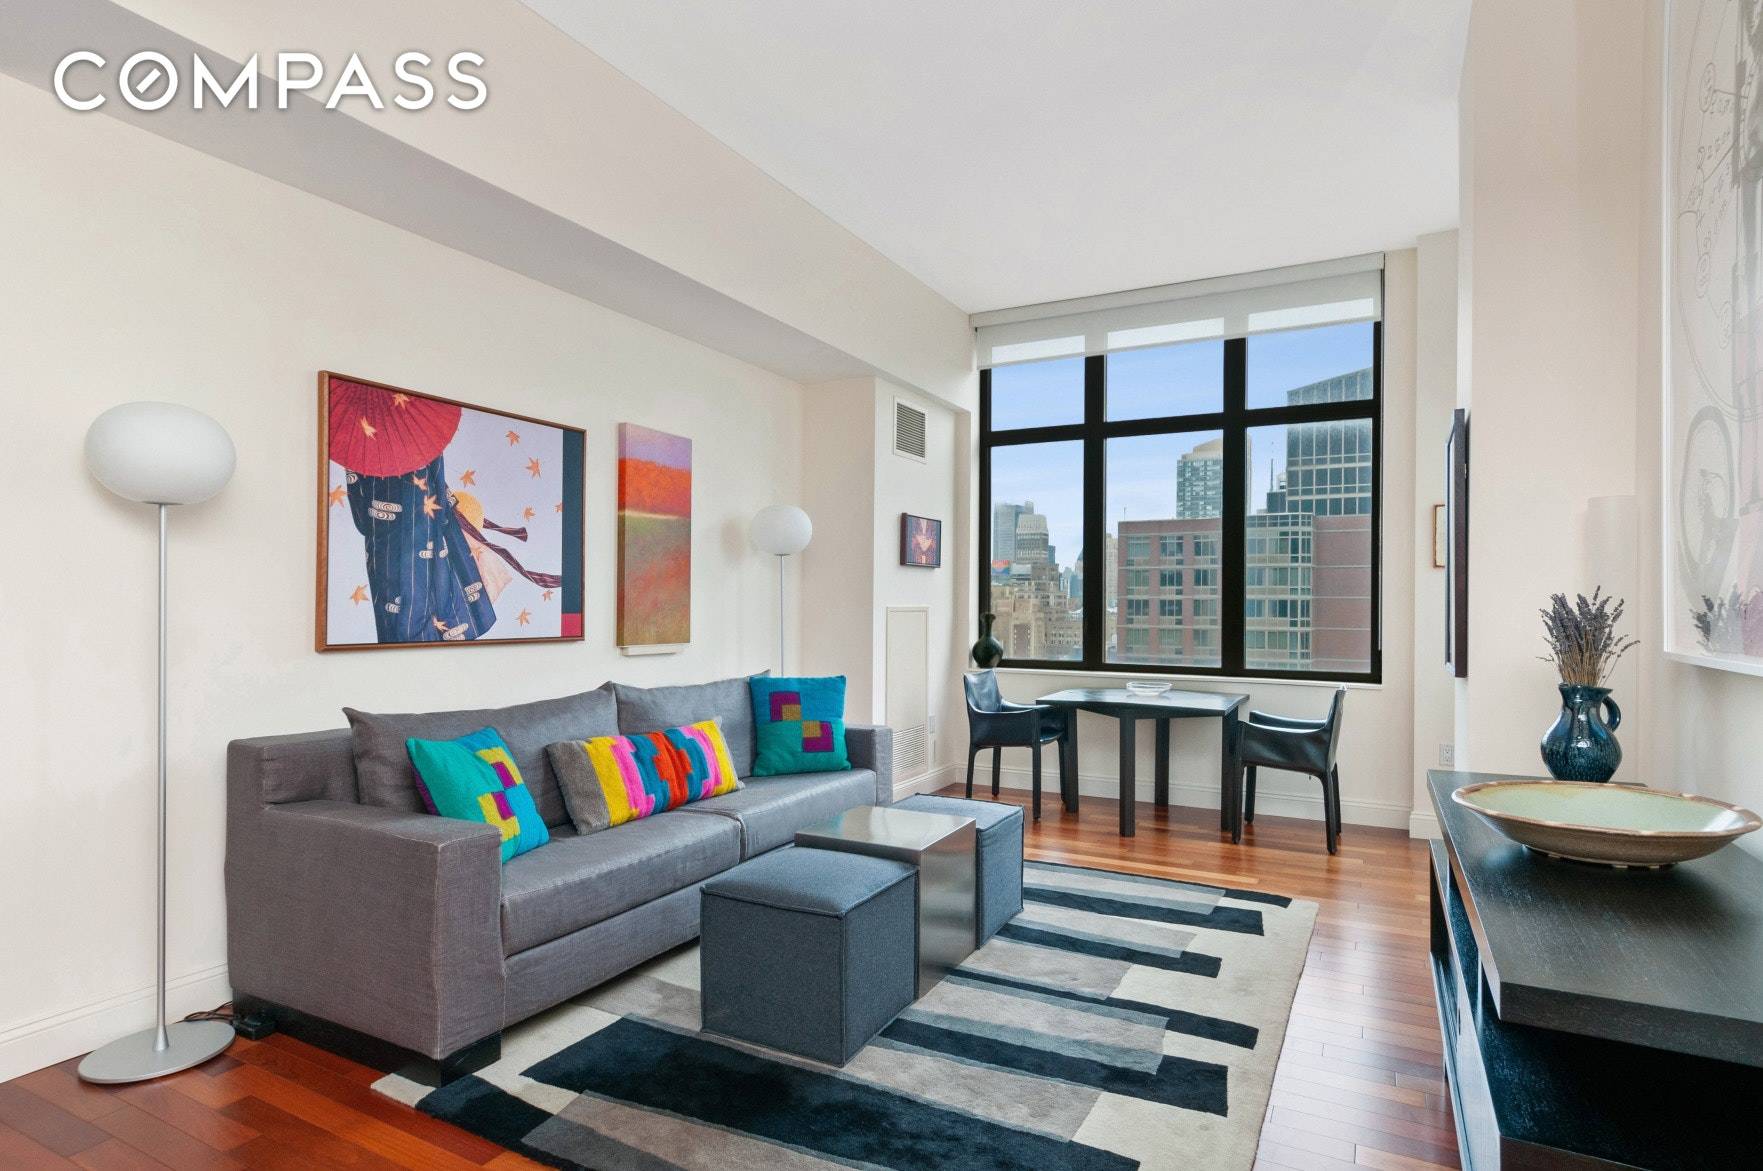 Welcome to this stunning triple mint 1 bedroom condominium at the Chelsea Stratus, a quintessential Manhattan home with sky high views in a sought after full service building in Chelsea.